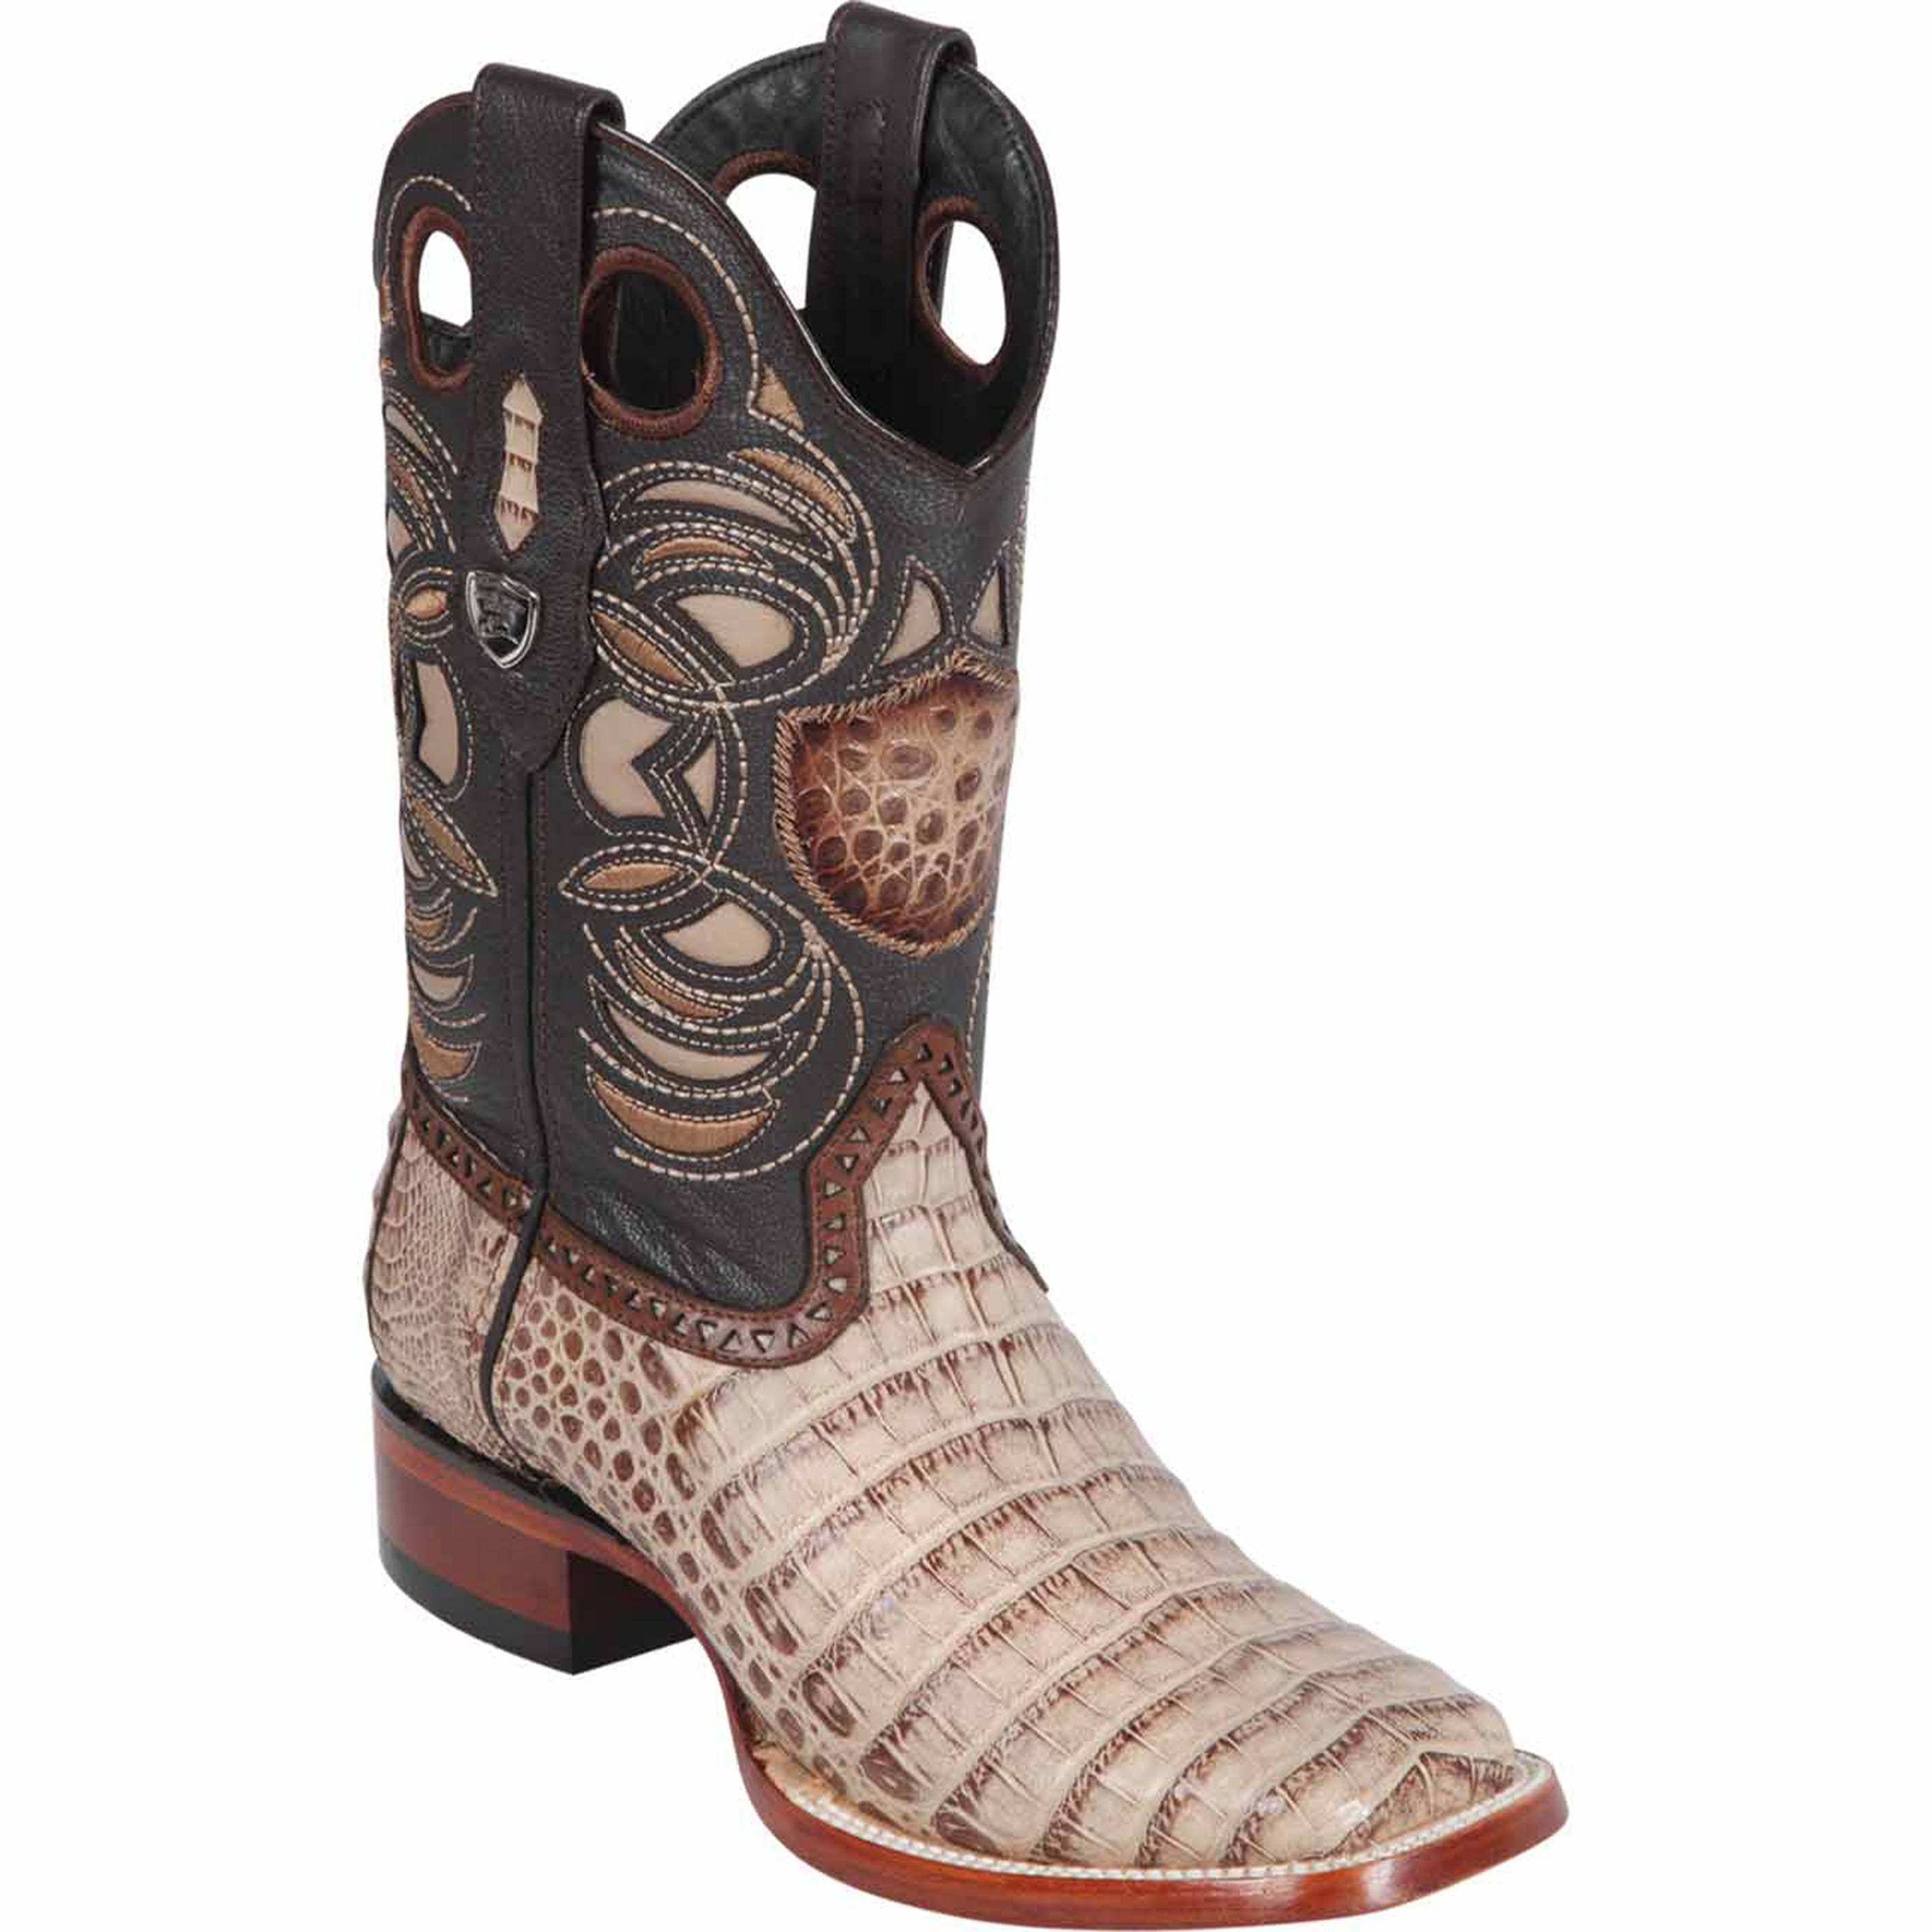 Caiman Square Toe Cowboy Boots - Wild West Boots